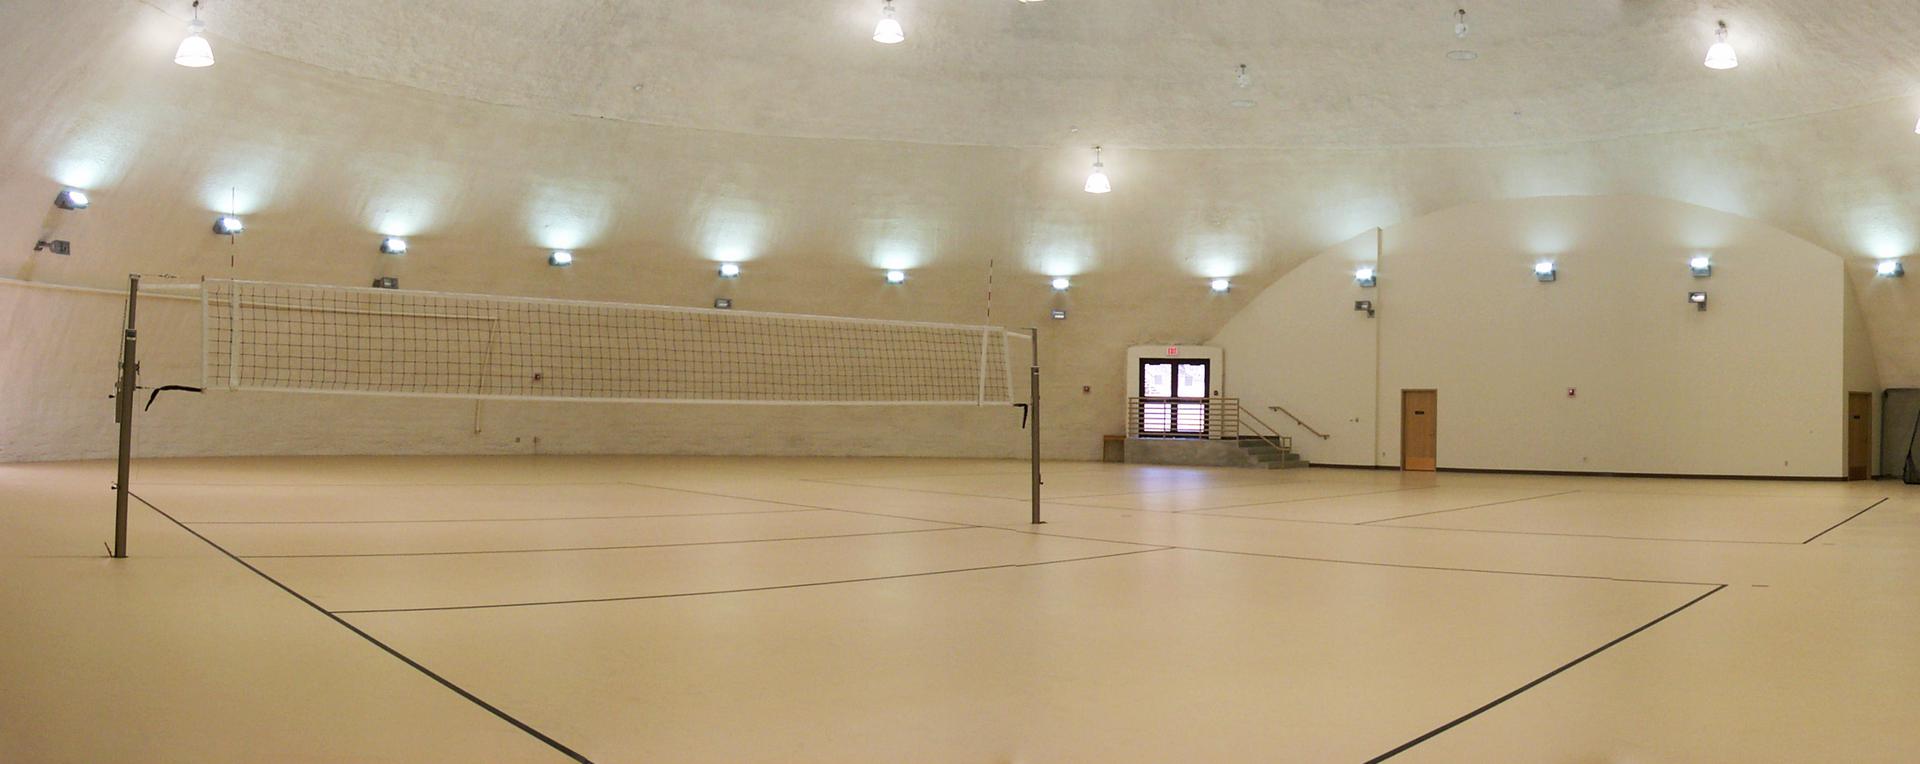 A volleyball net set up inside the practice gymnasium.